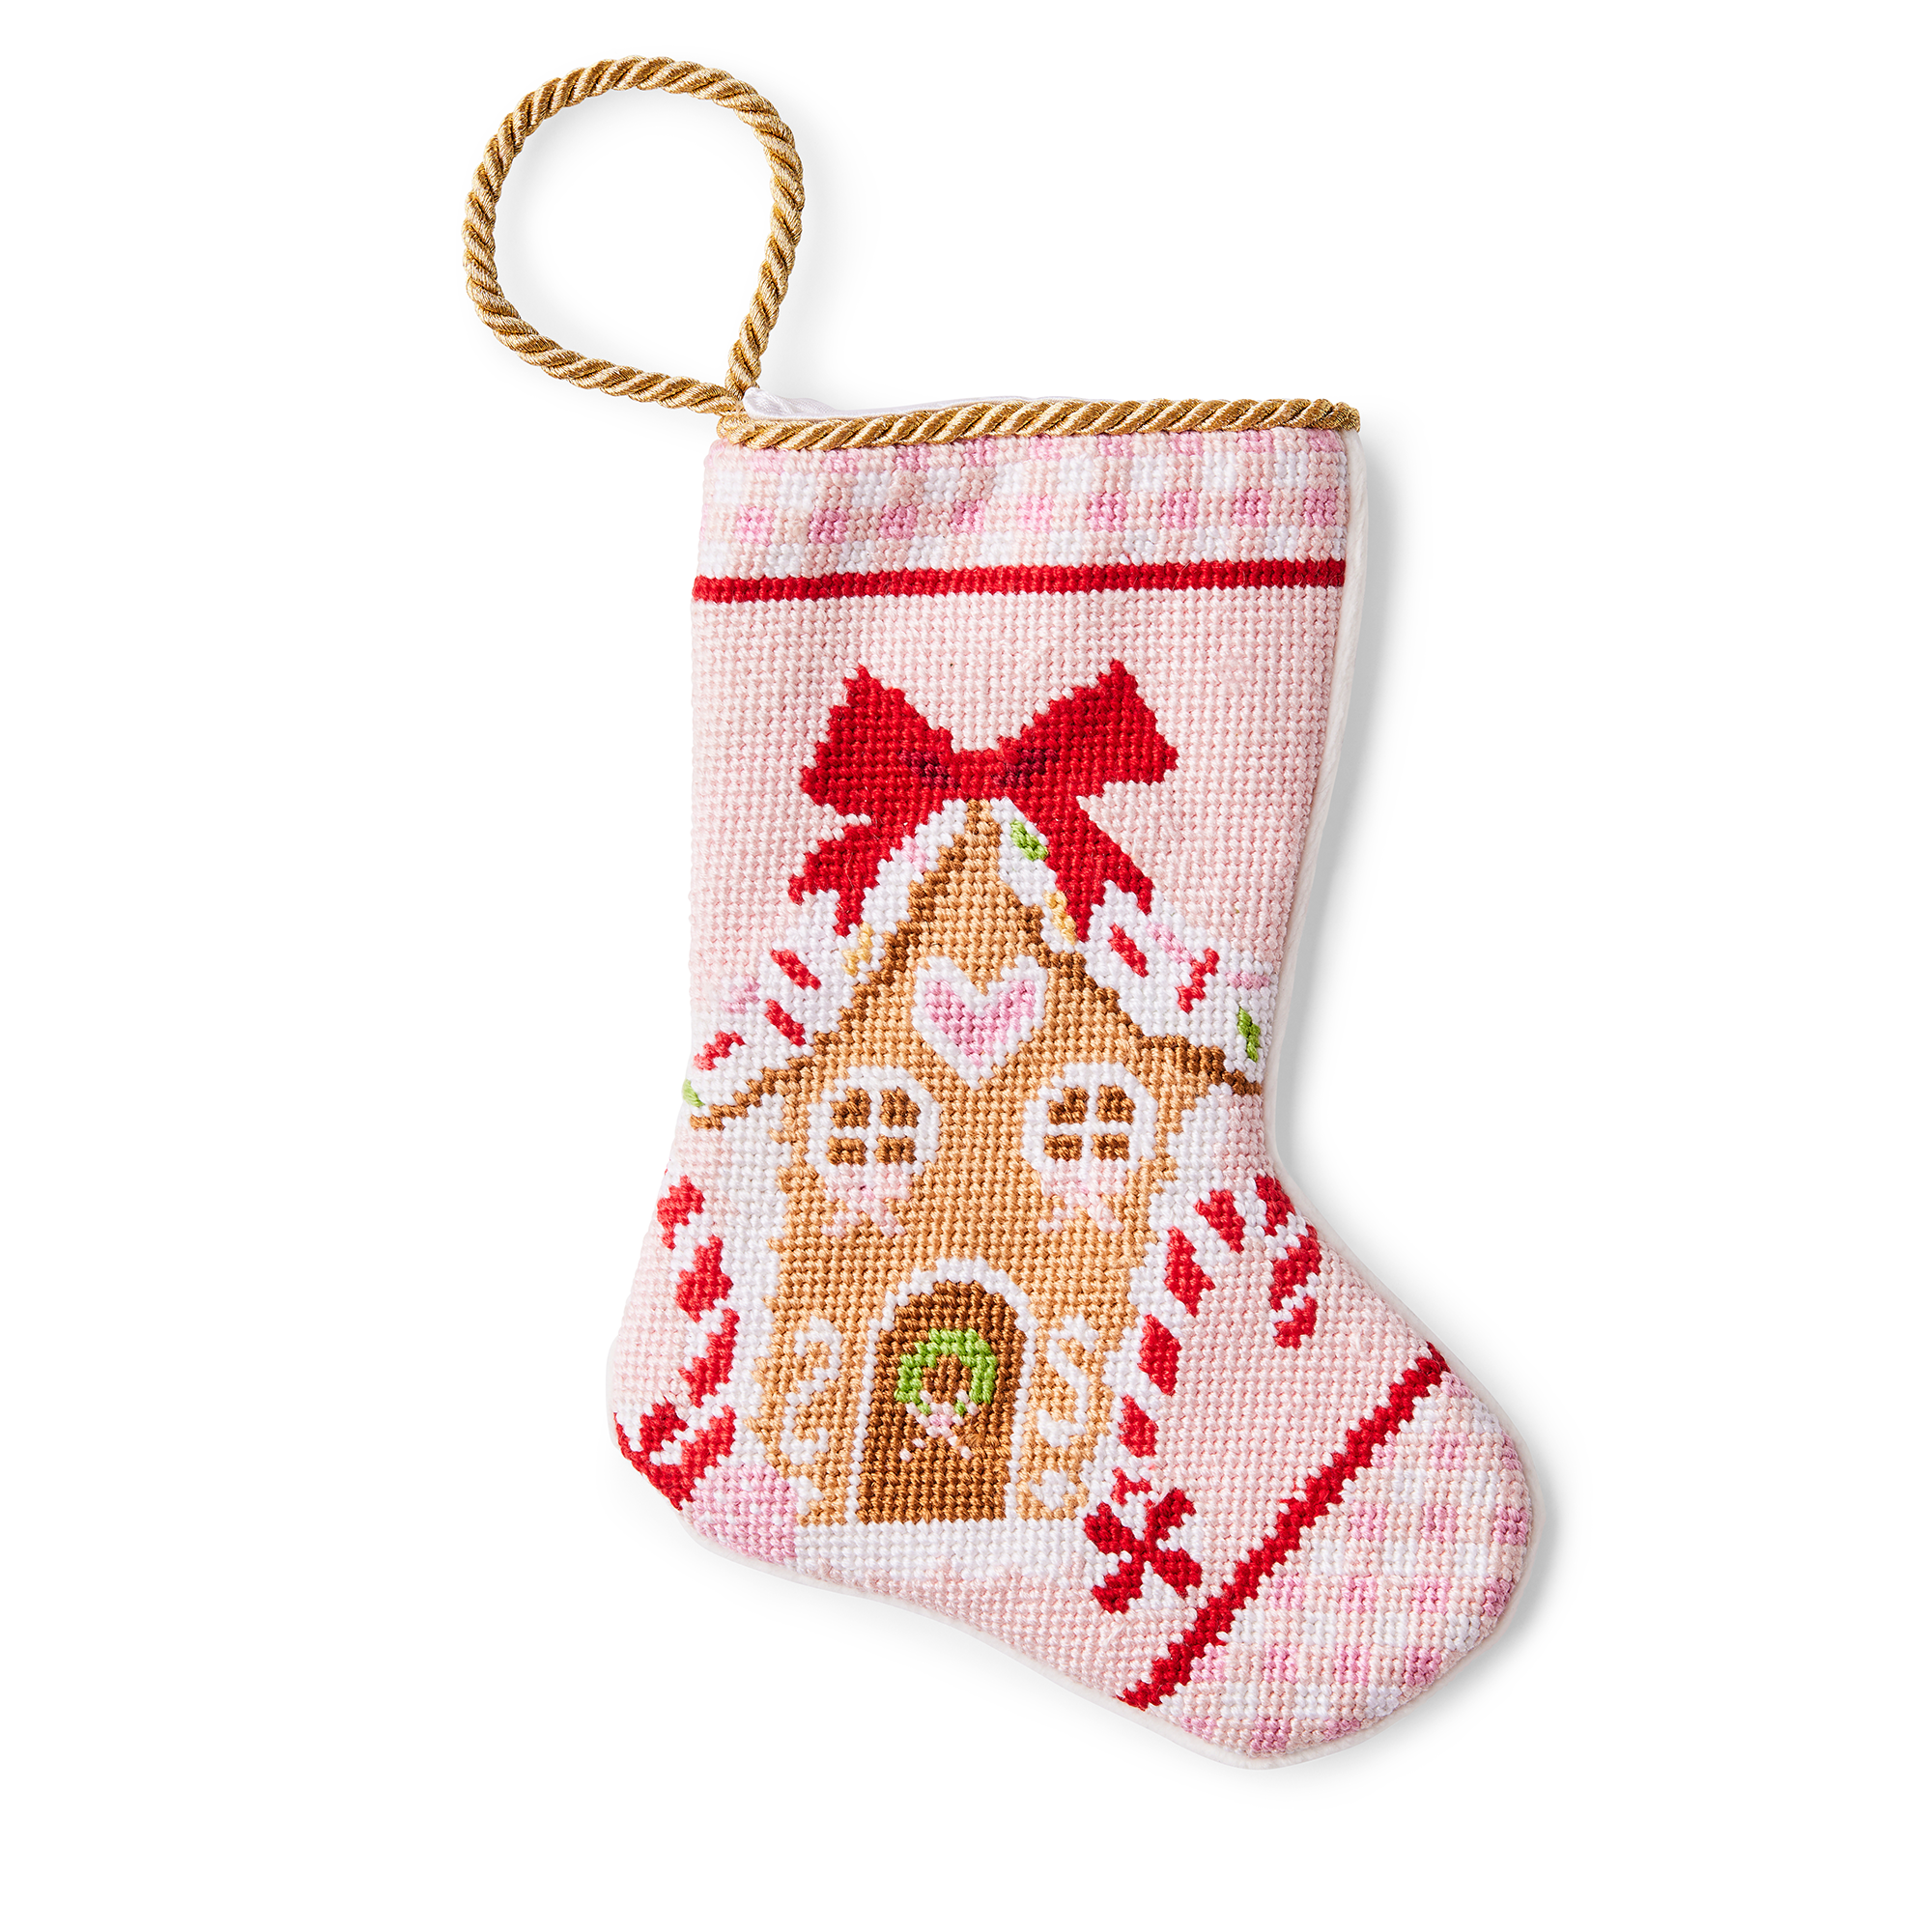 A charming Christmas stocking, featuring an illustrated gingerbread house adorned with festive decorations. The delightful design includes colorful candies, lollipop, and a snowy roof, creating a whimsical holiday scene. A gold loop is perfect for hanging by the fireplace.